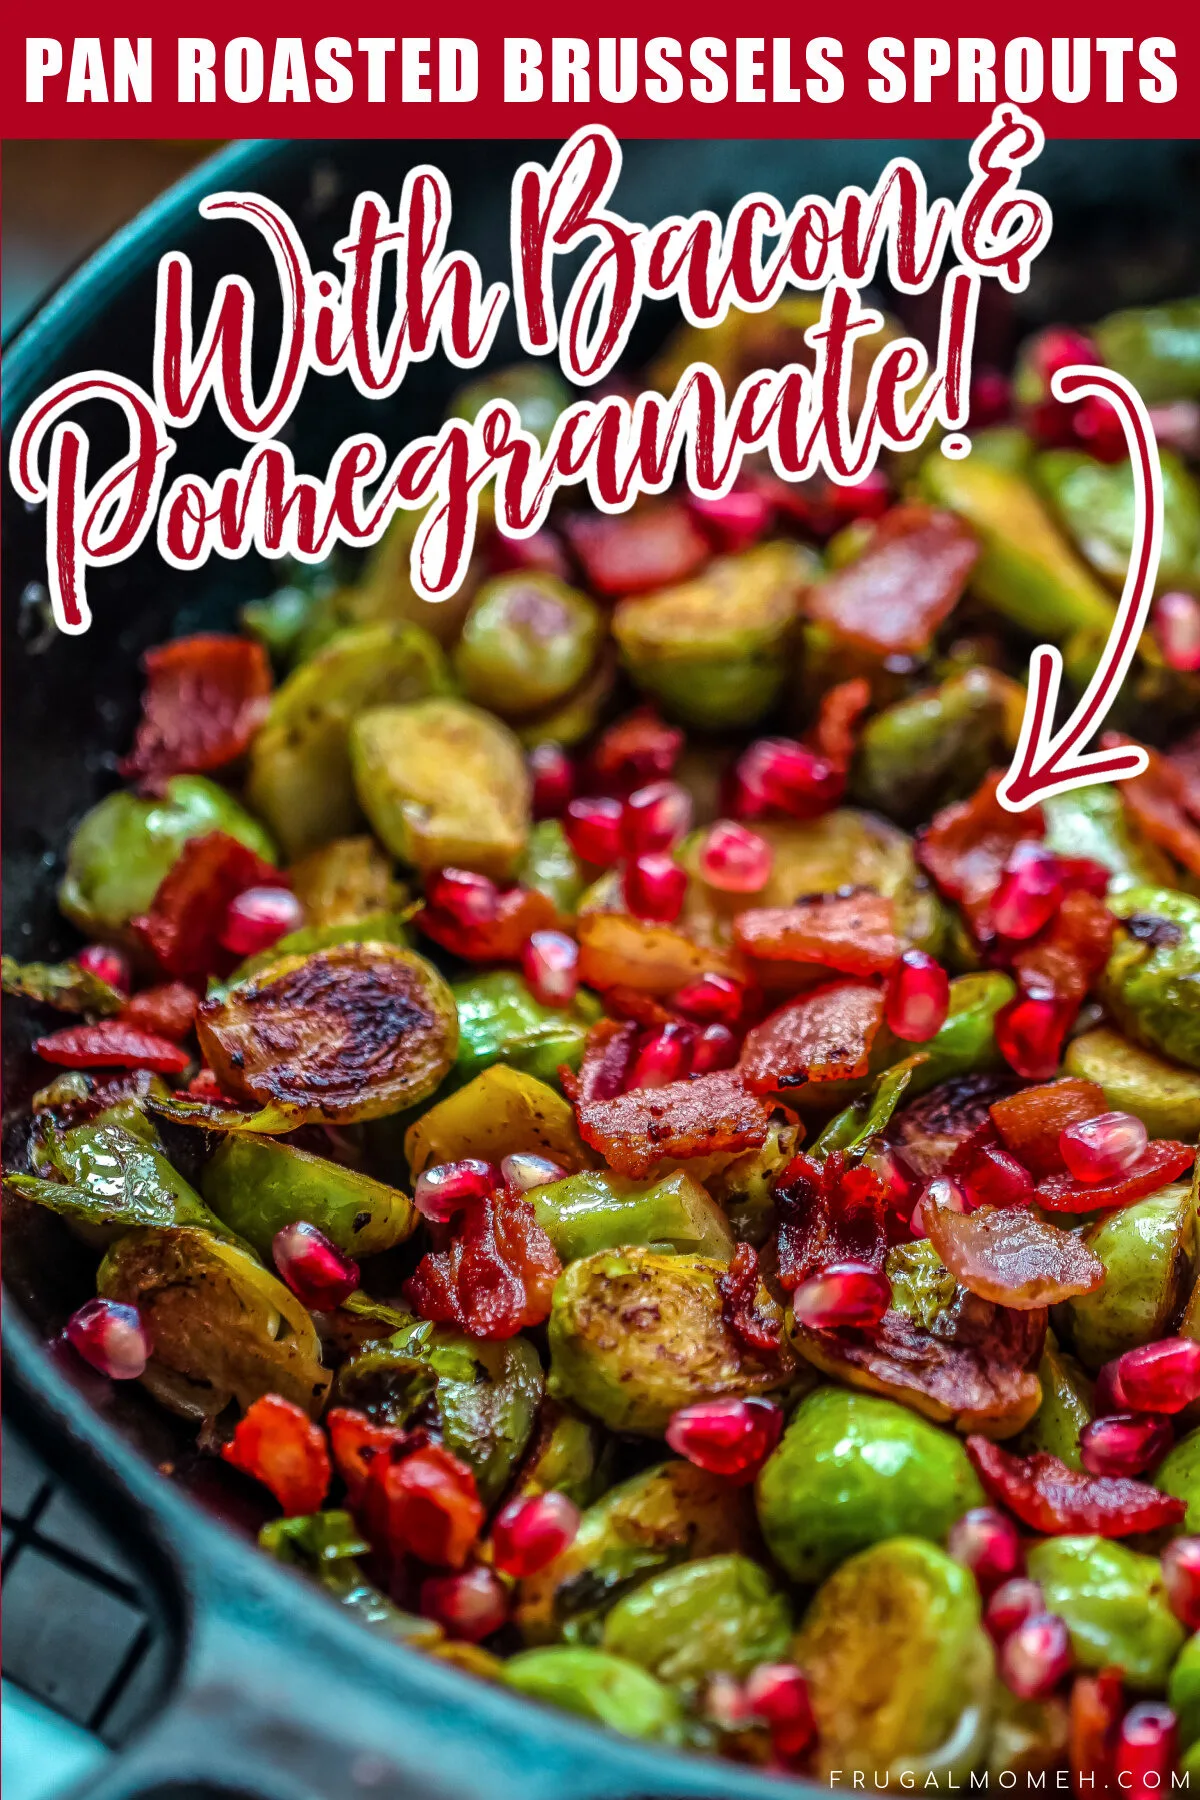 Pan Roasted Brussels Sprouts with Bacon & Pomegranate makes for a tasty holiday side dish that works just as easily for a weeknight side.